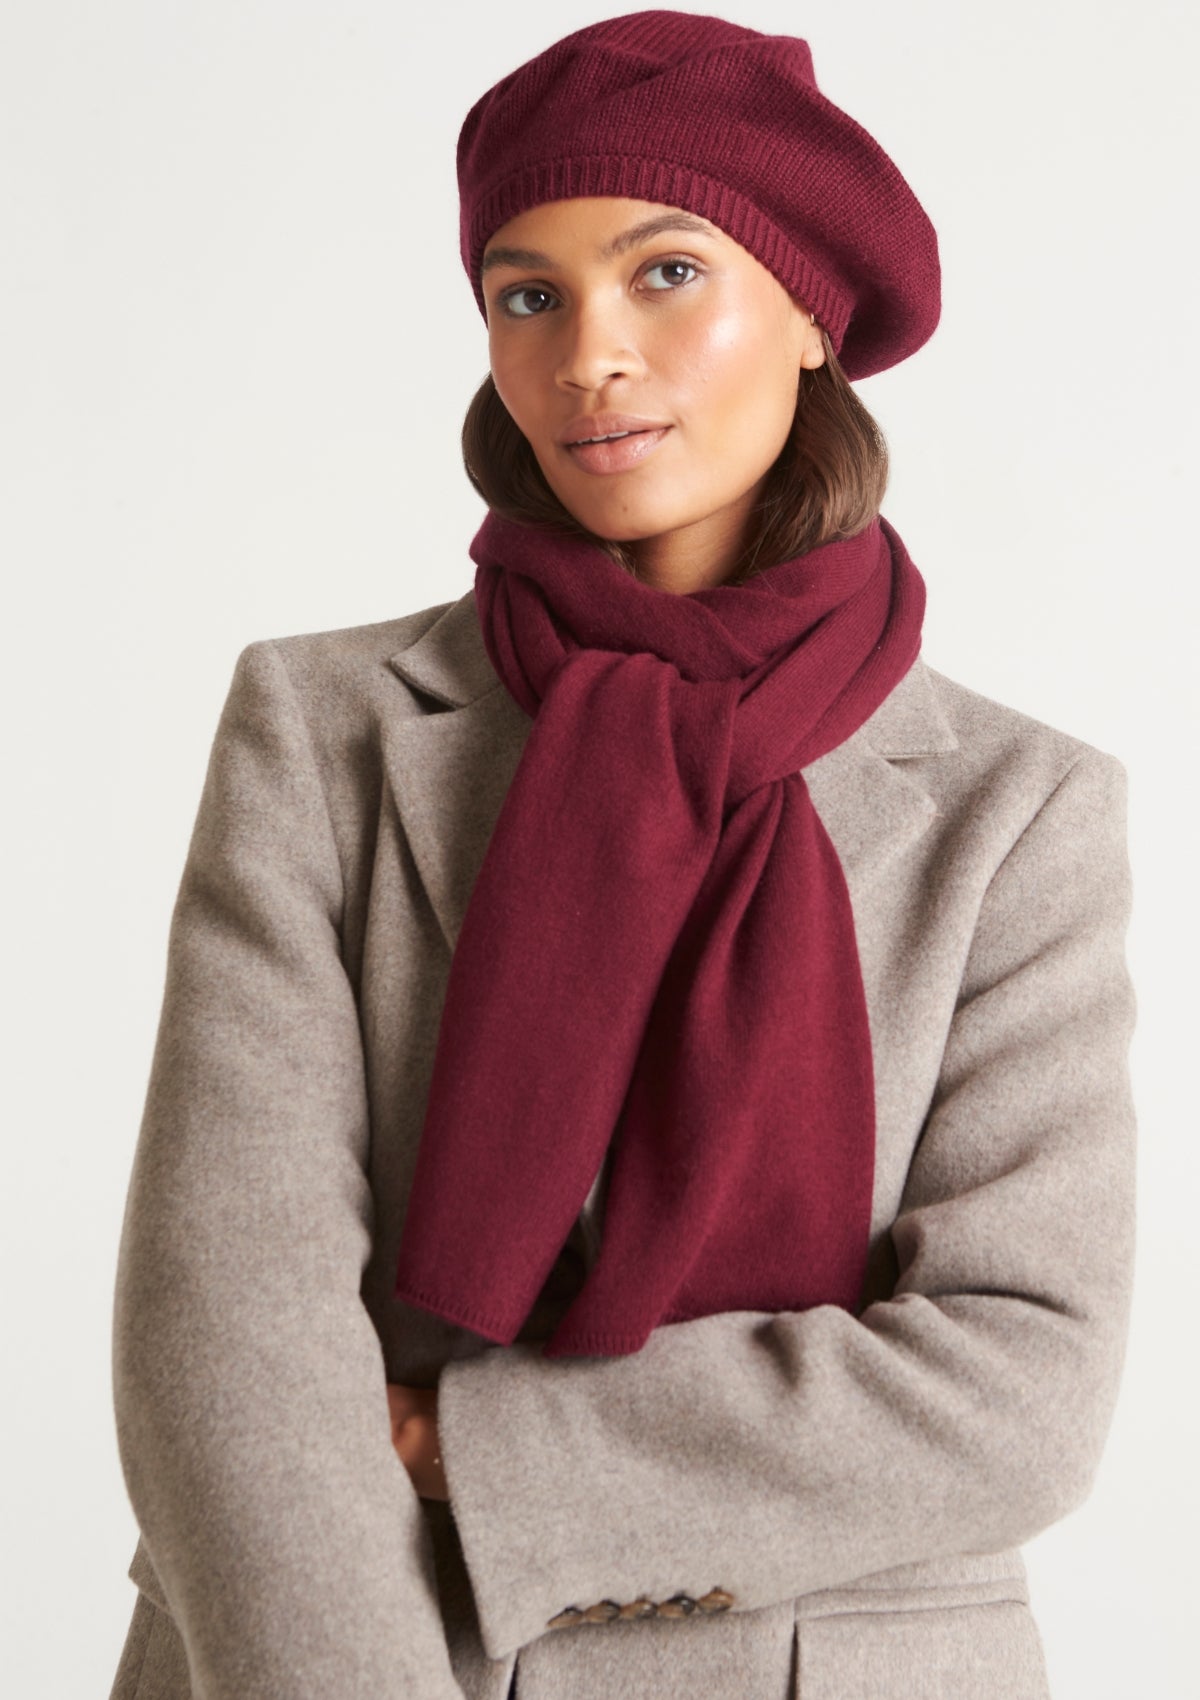 Cashmere Beret in Barolo Red